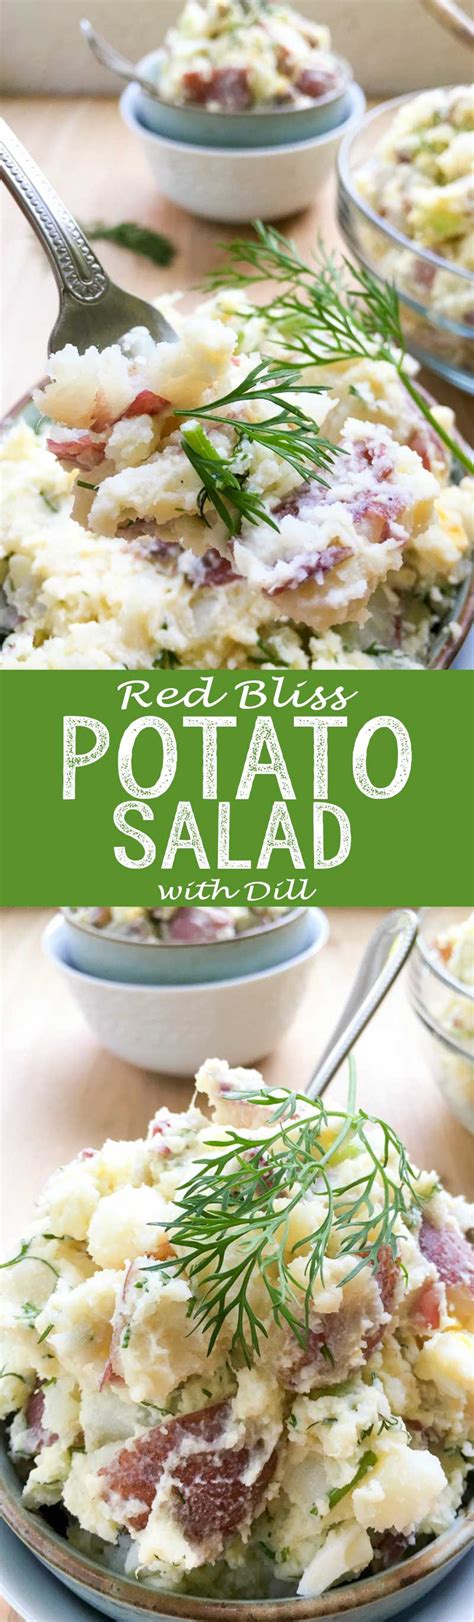 Red Bliss Potato Salad With Dill Eazy Peazy Mealz